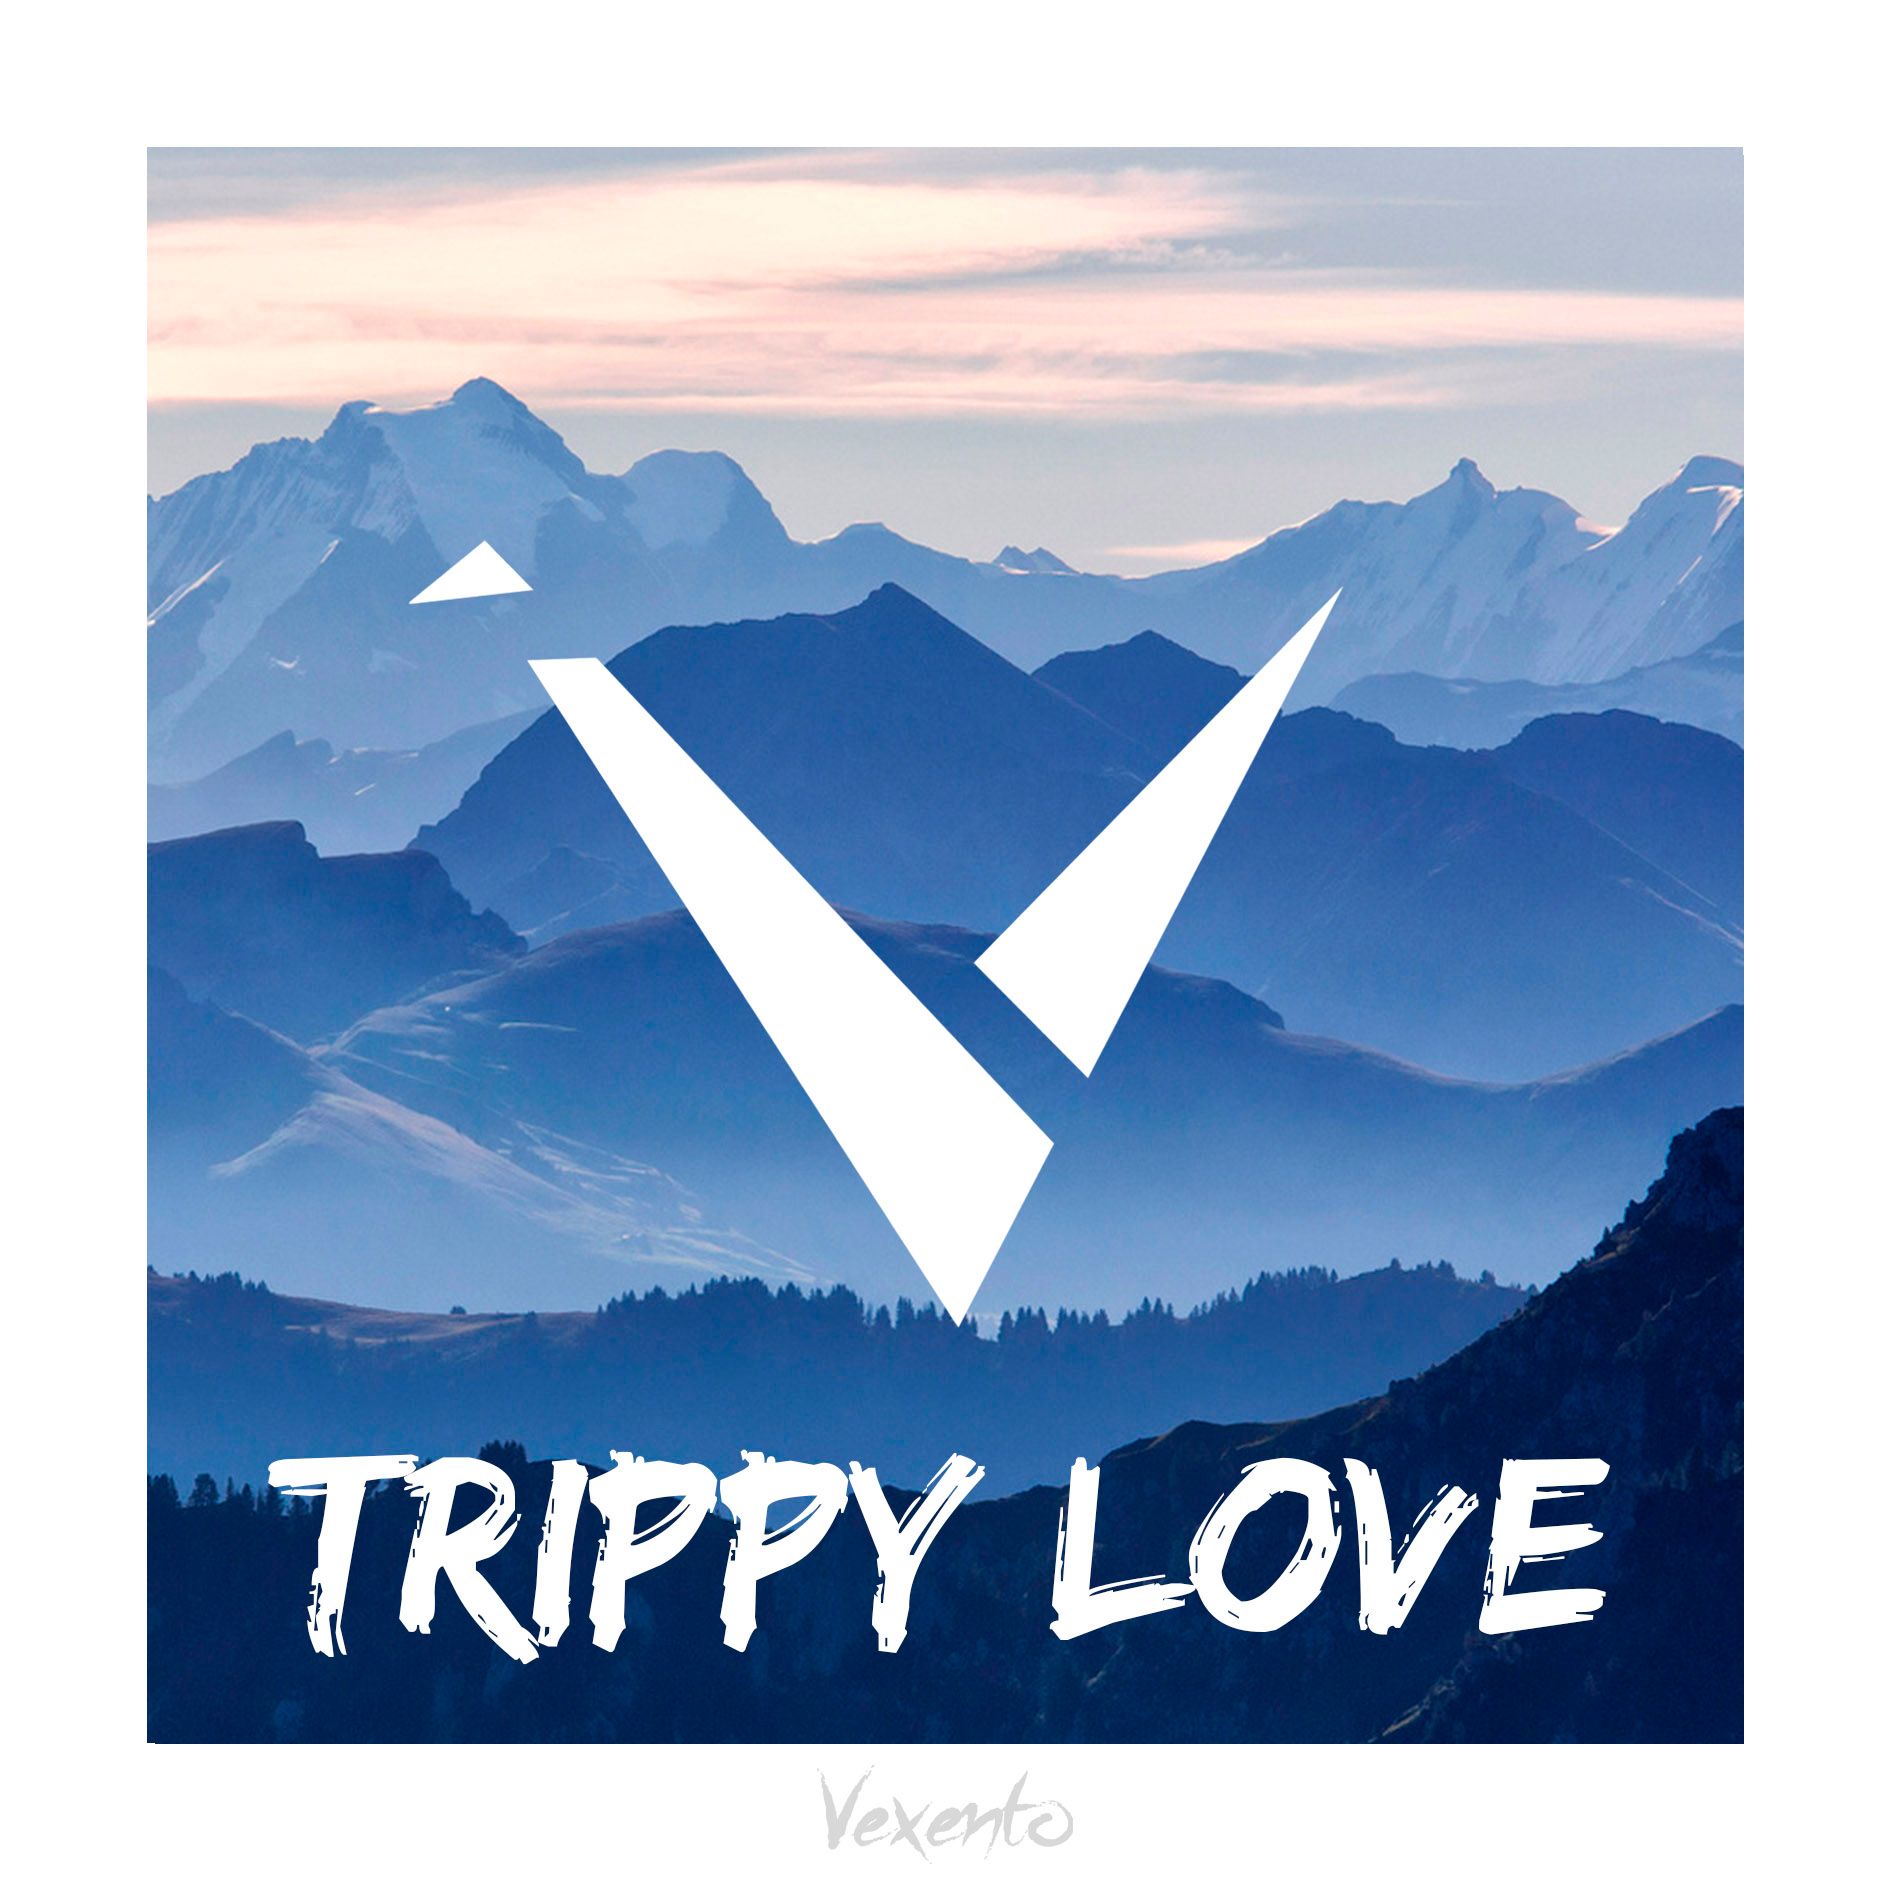 Download Vexento - Trippy Love